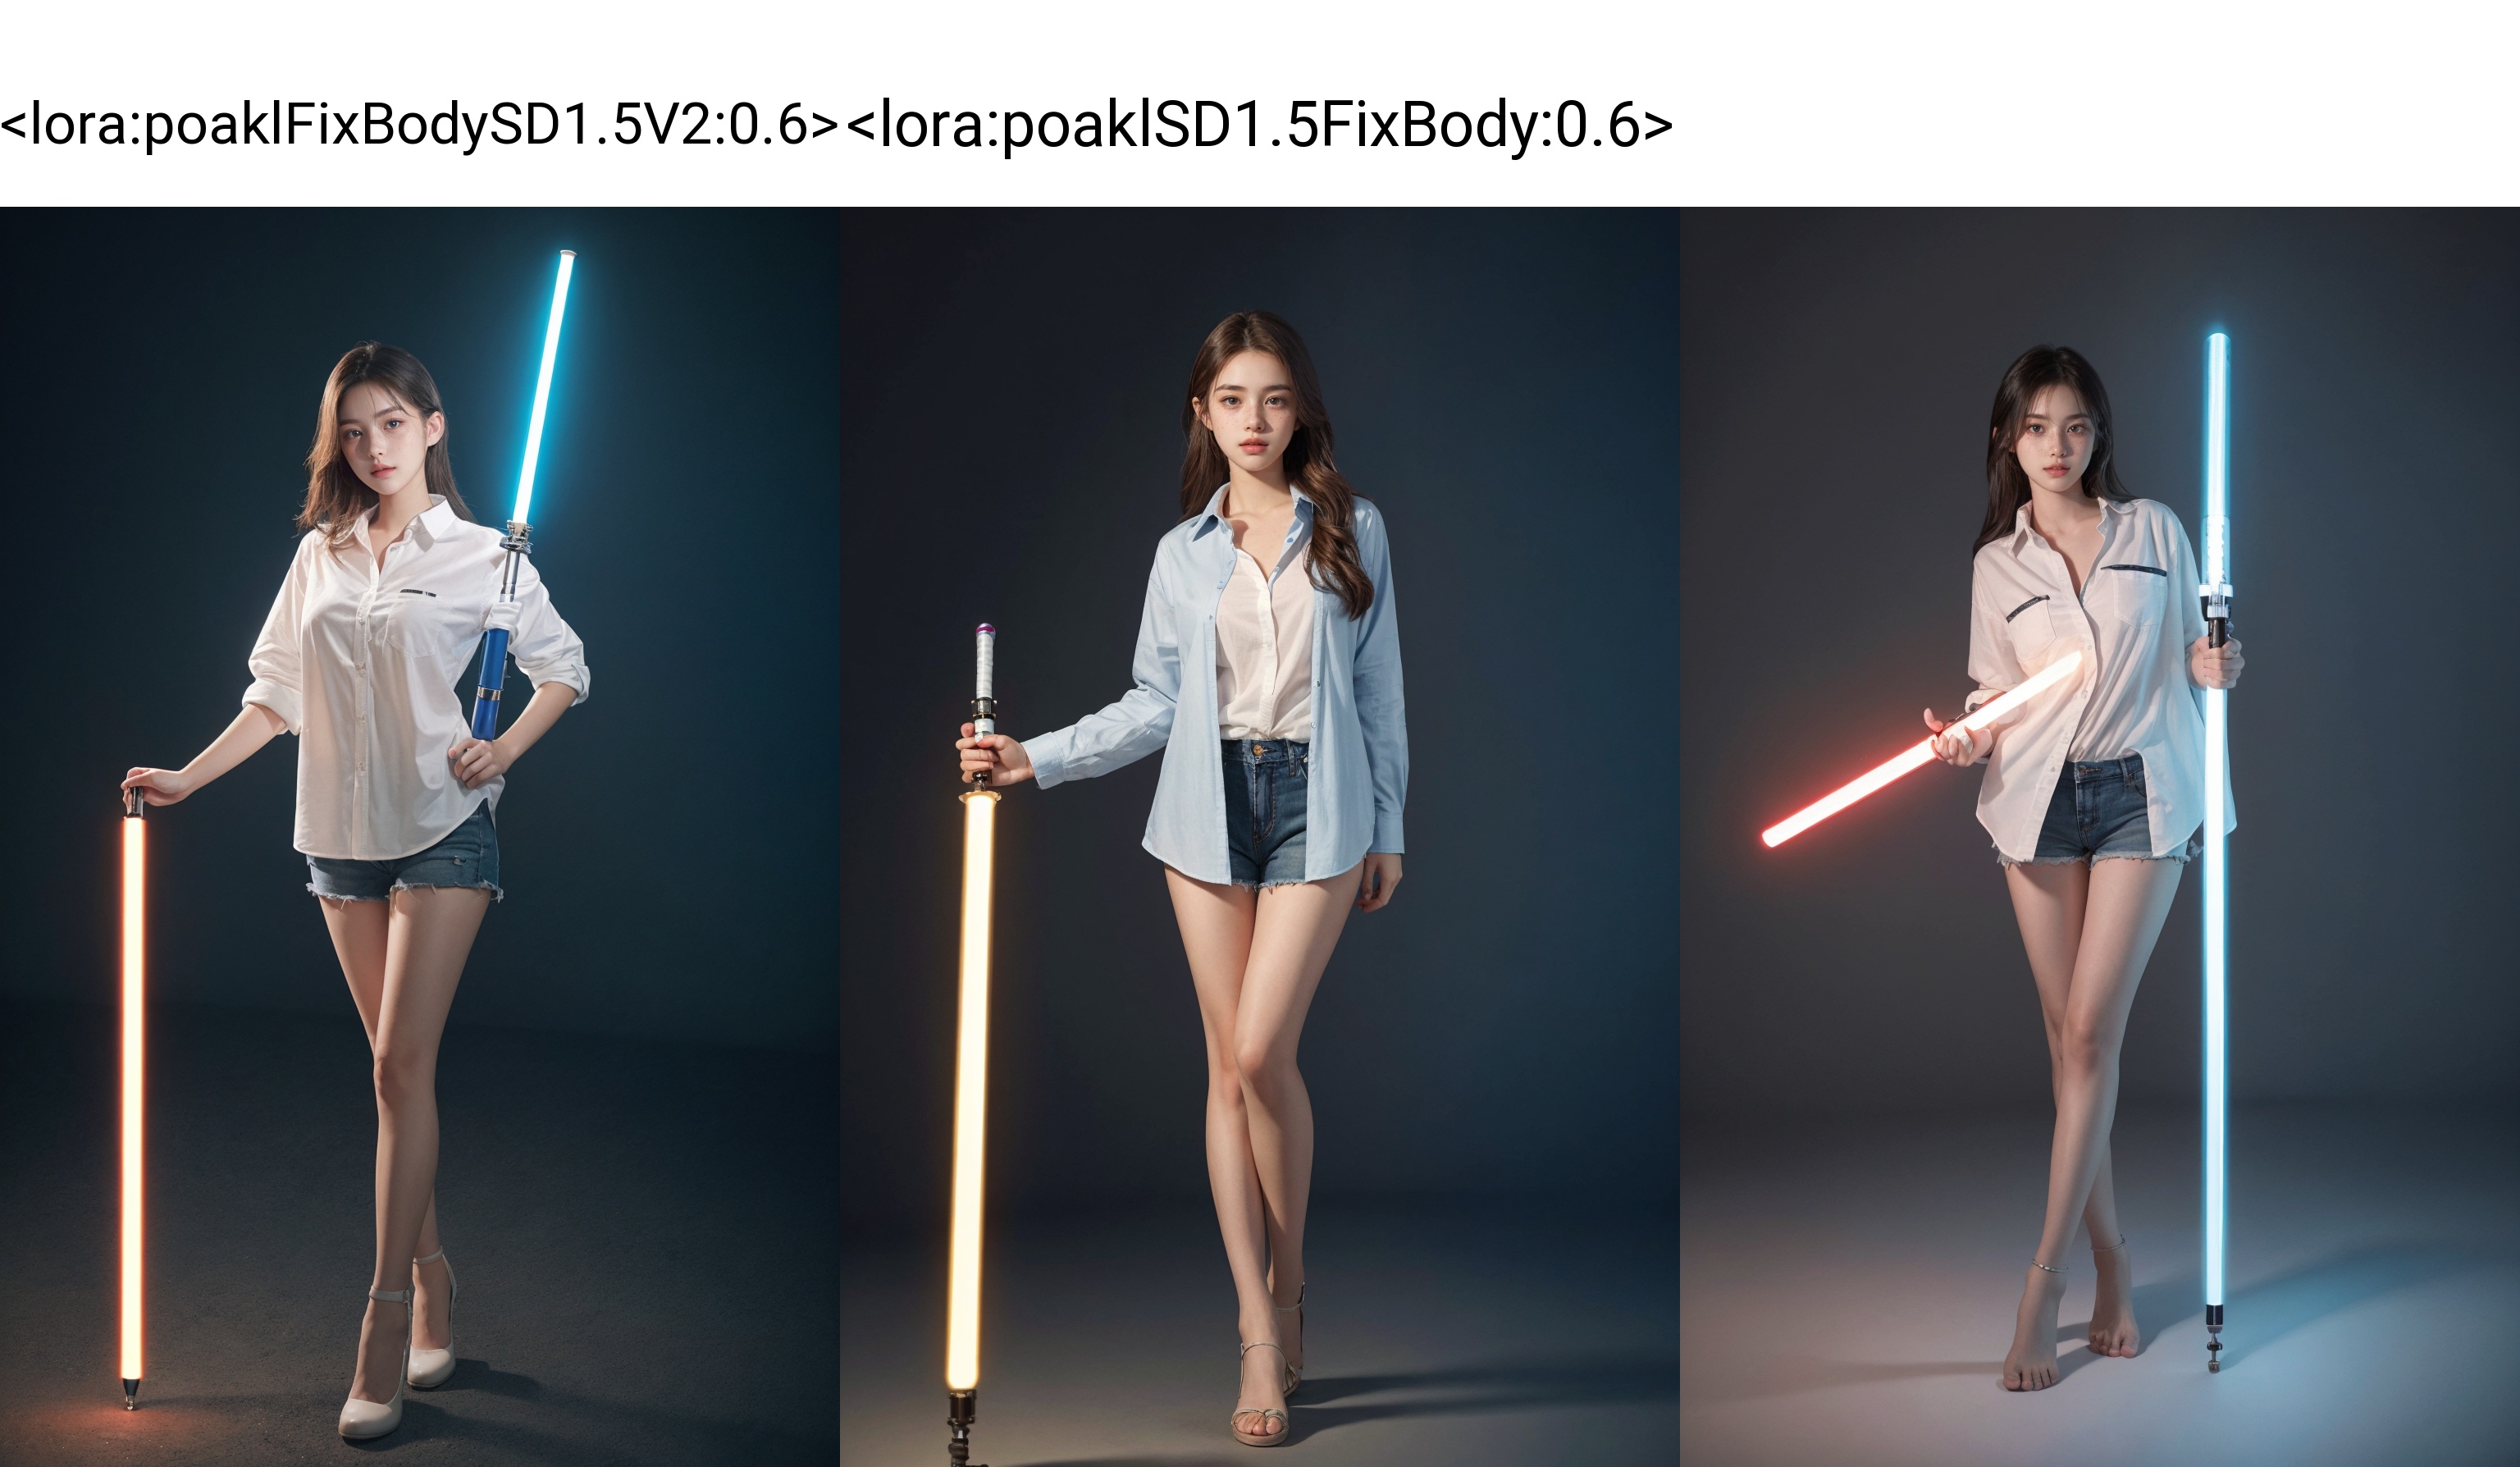 1girl,18 years old,cute face,full lips,holding one blue lightsabre,freckles,wearing shirt,beautiful,dslr,8k,4k,natural skin,High resolution,SFW,full body photo,high resolution image,((poakl)),<lora:poaklFixBodySD1.5V2:0.6>,